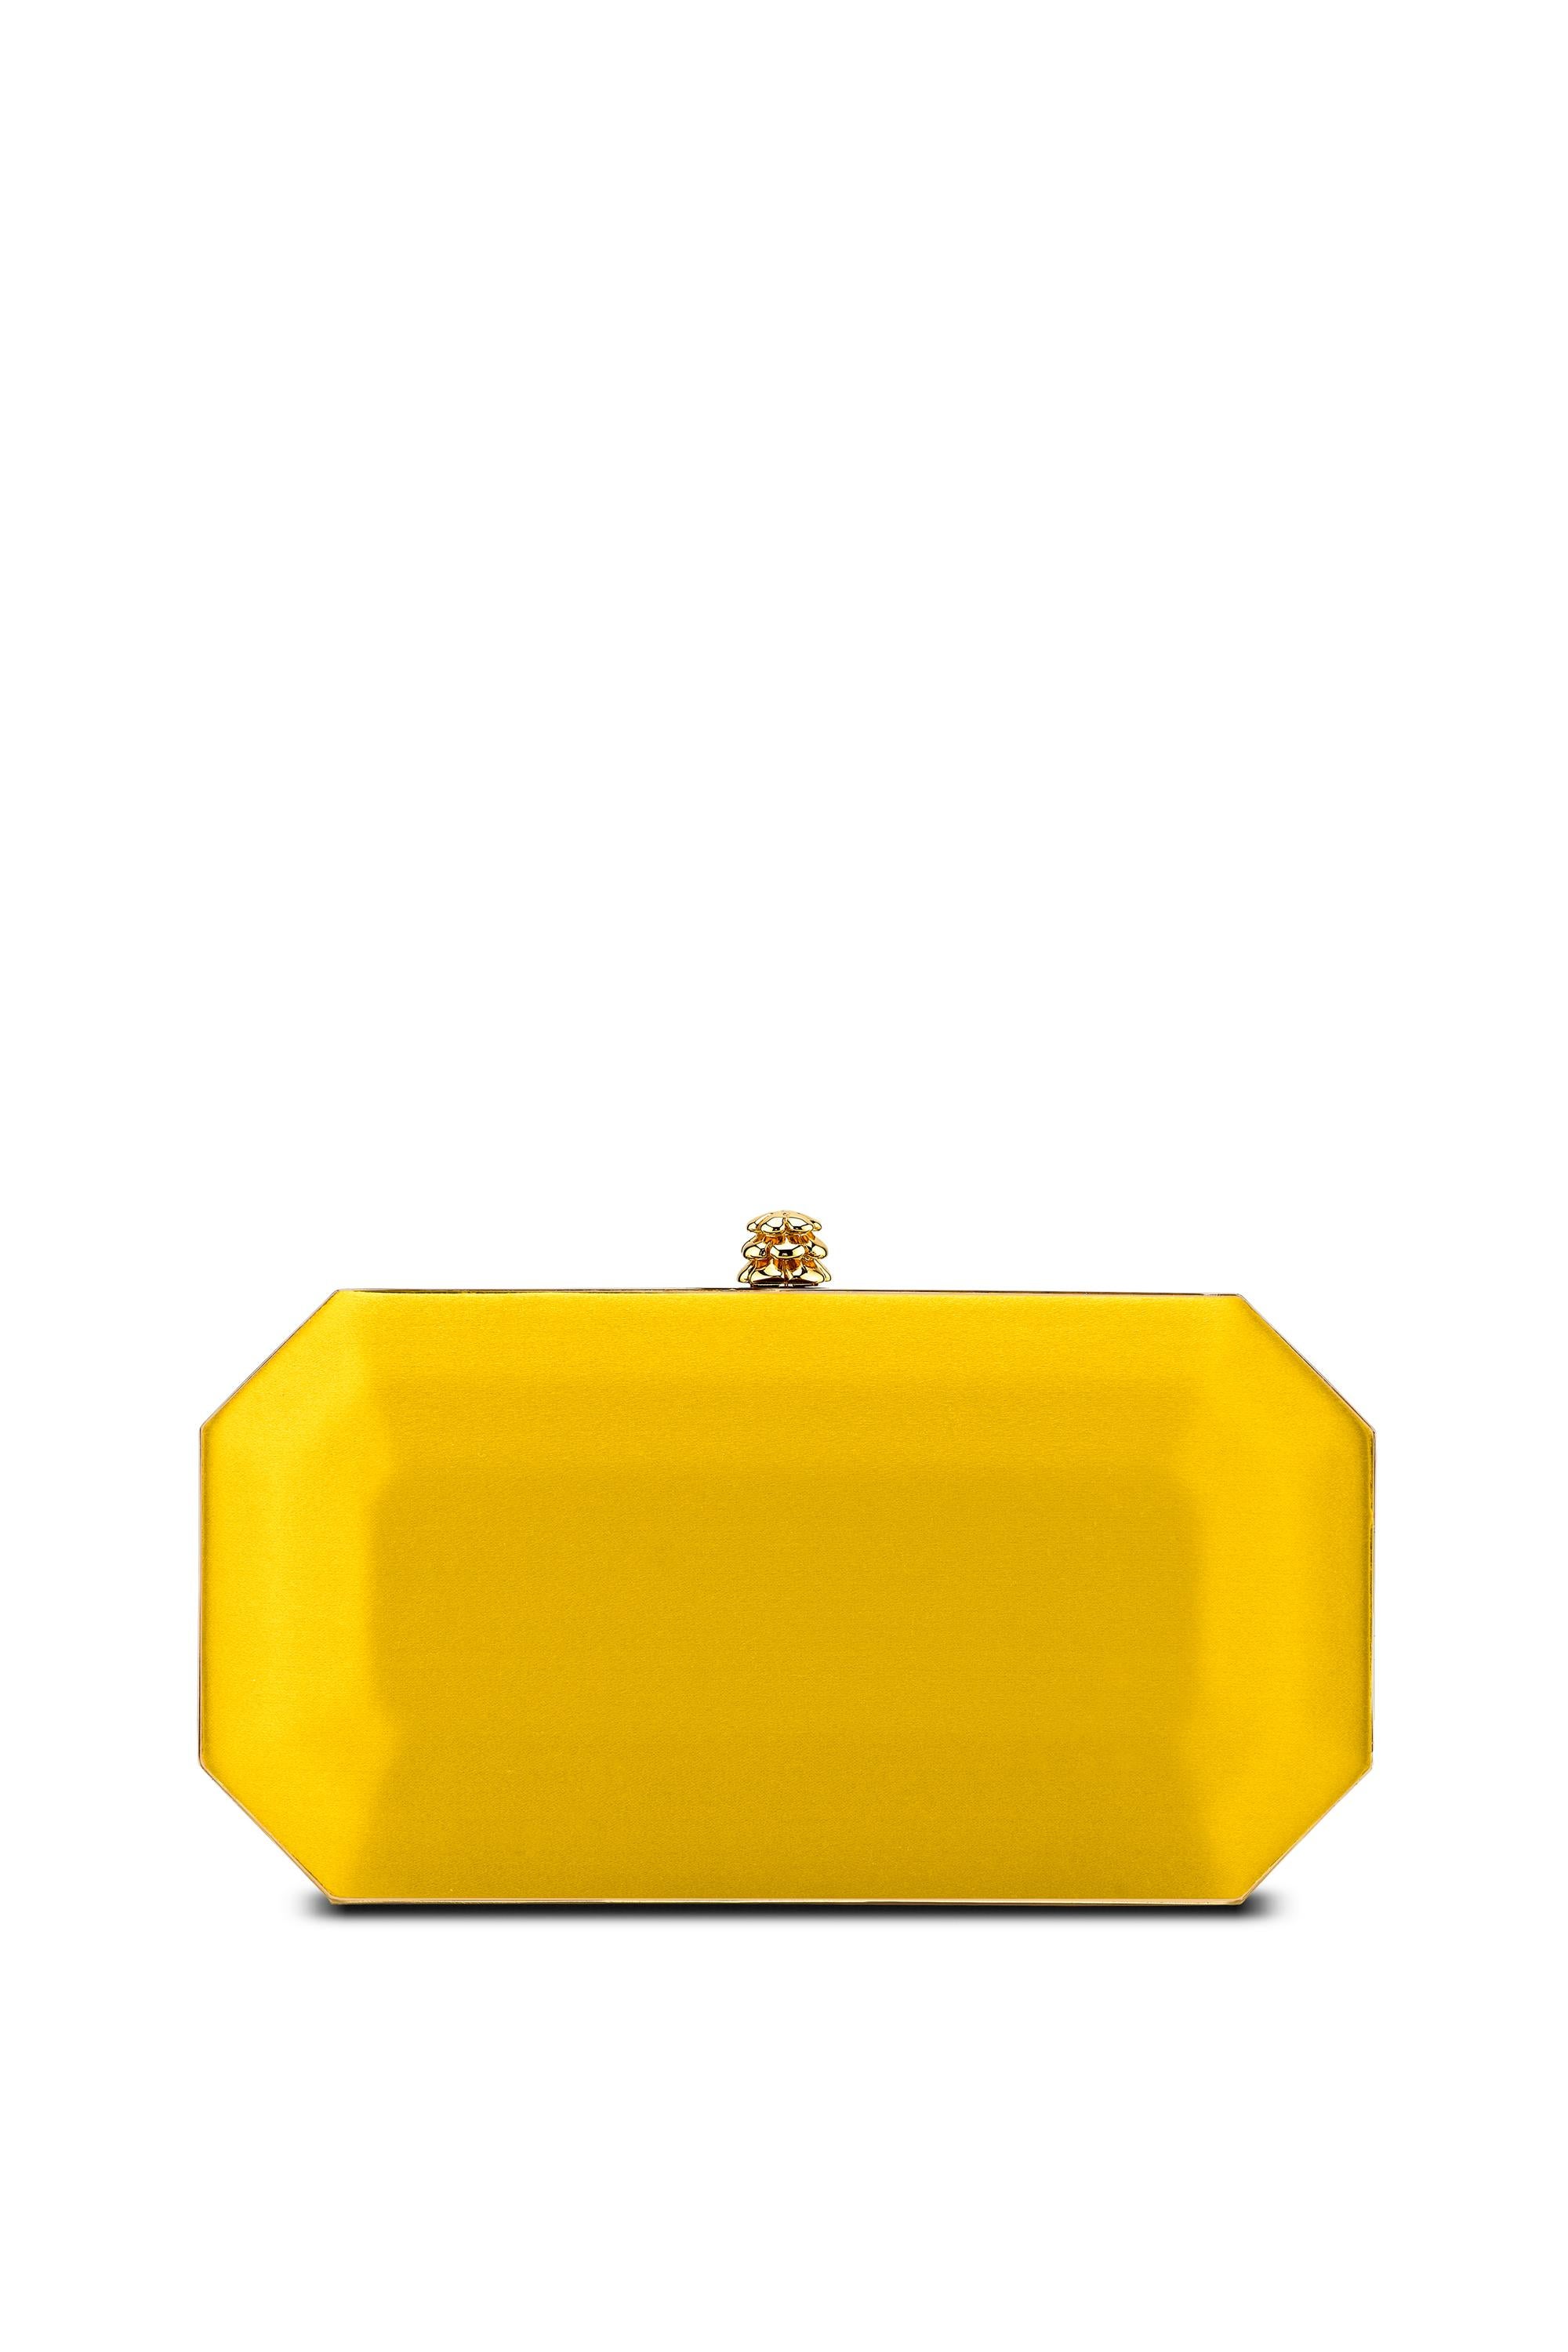 The Perry Small is featured in our Canary satin with gold hardware. The Perry is a hard-framed clutch designed with interior pockets and an optional gold cross-body chain. It's elegant emerald shape is inspired by Tyler's own engagement ring and